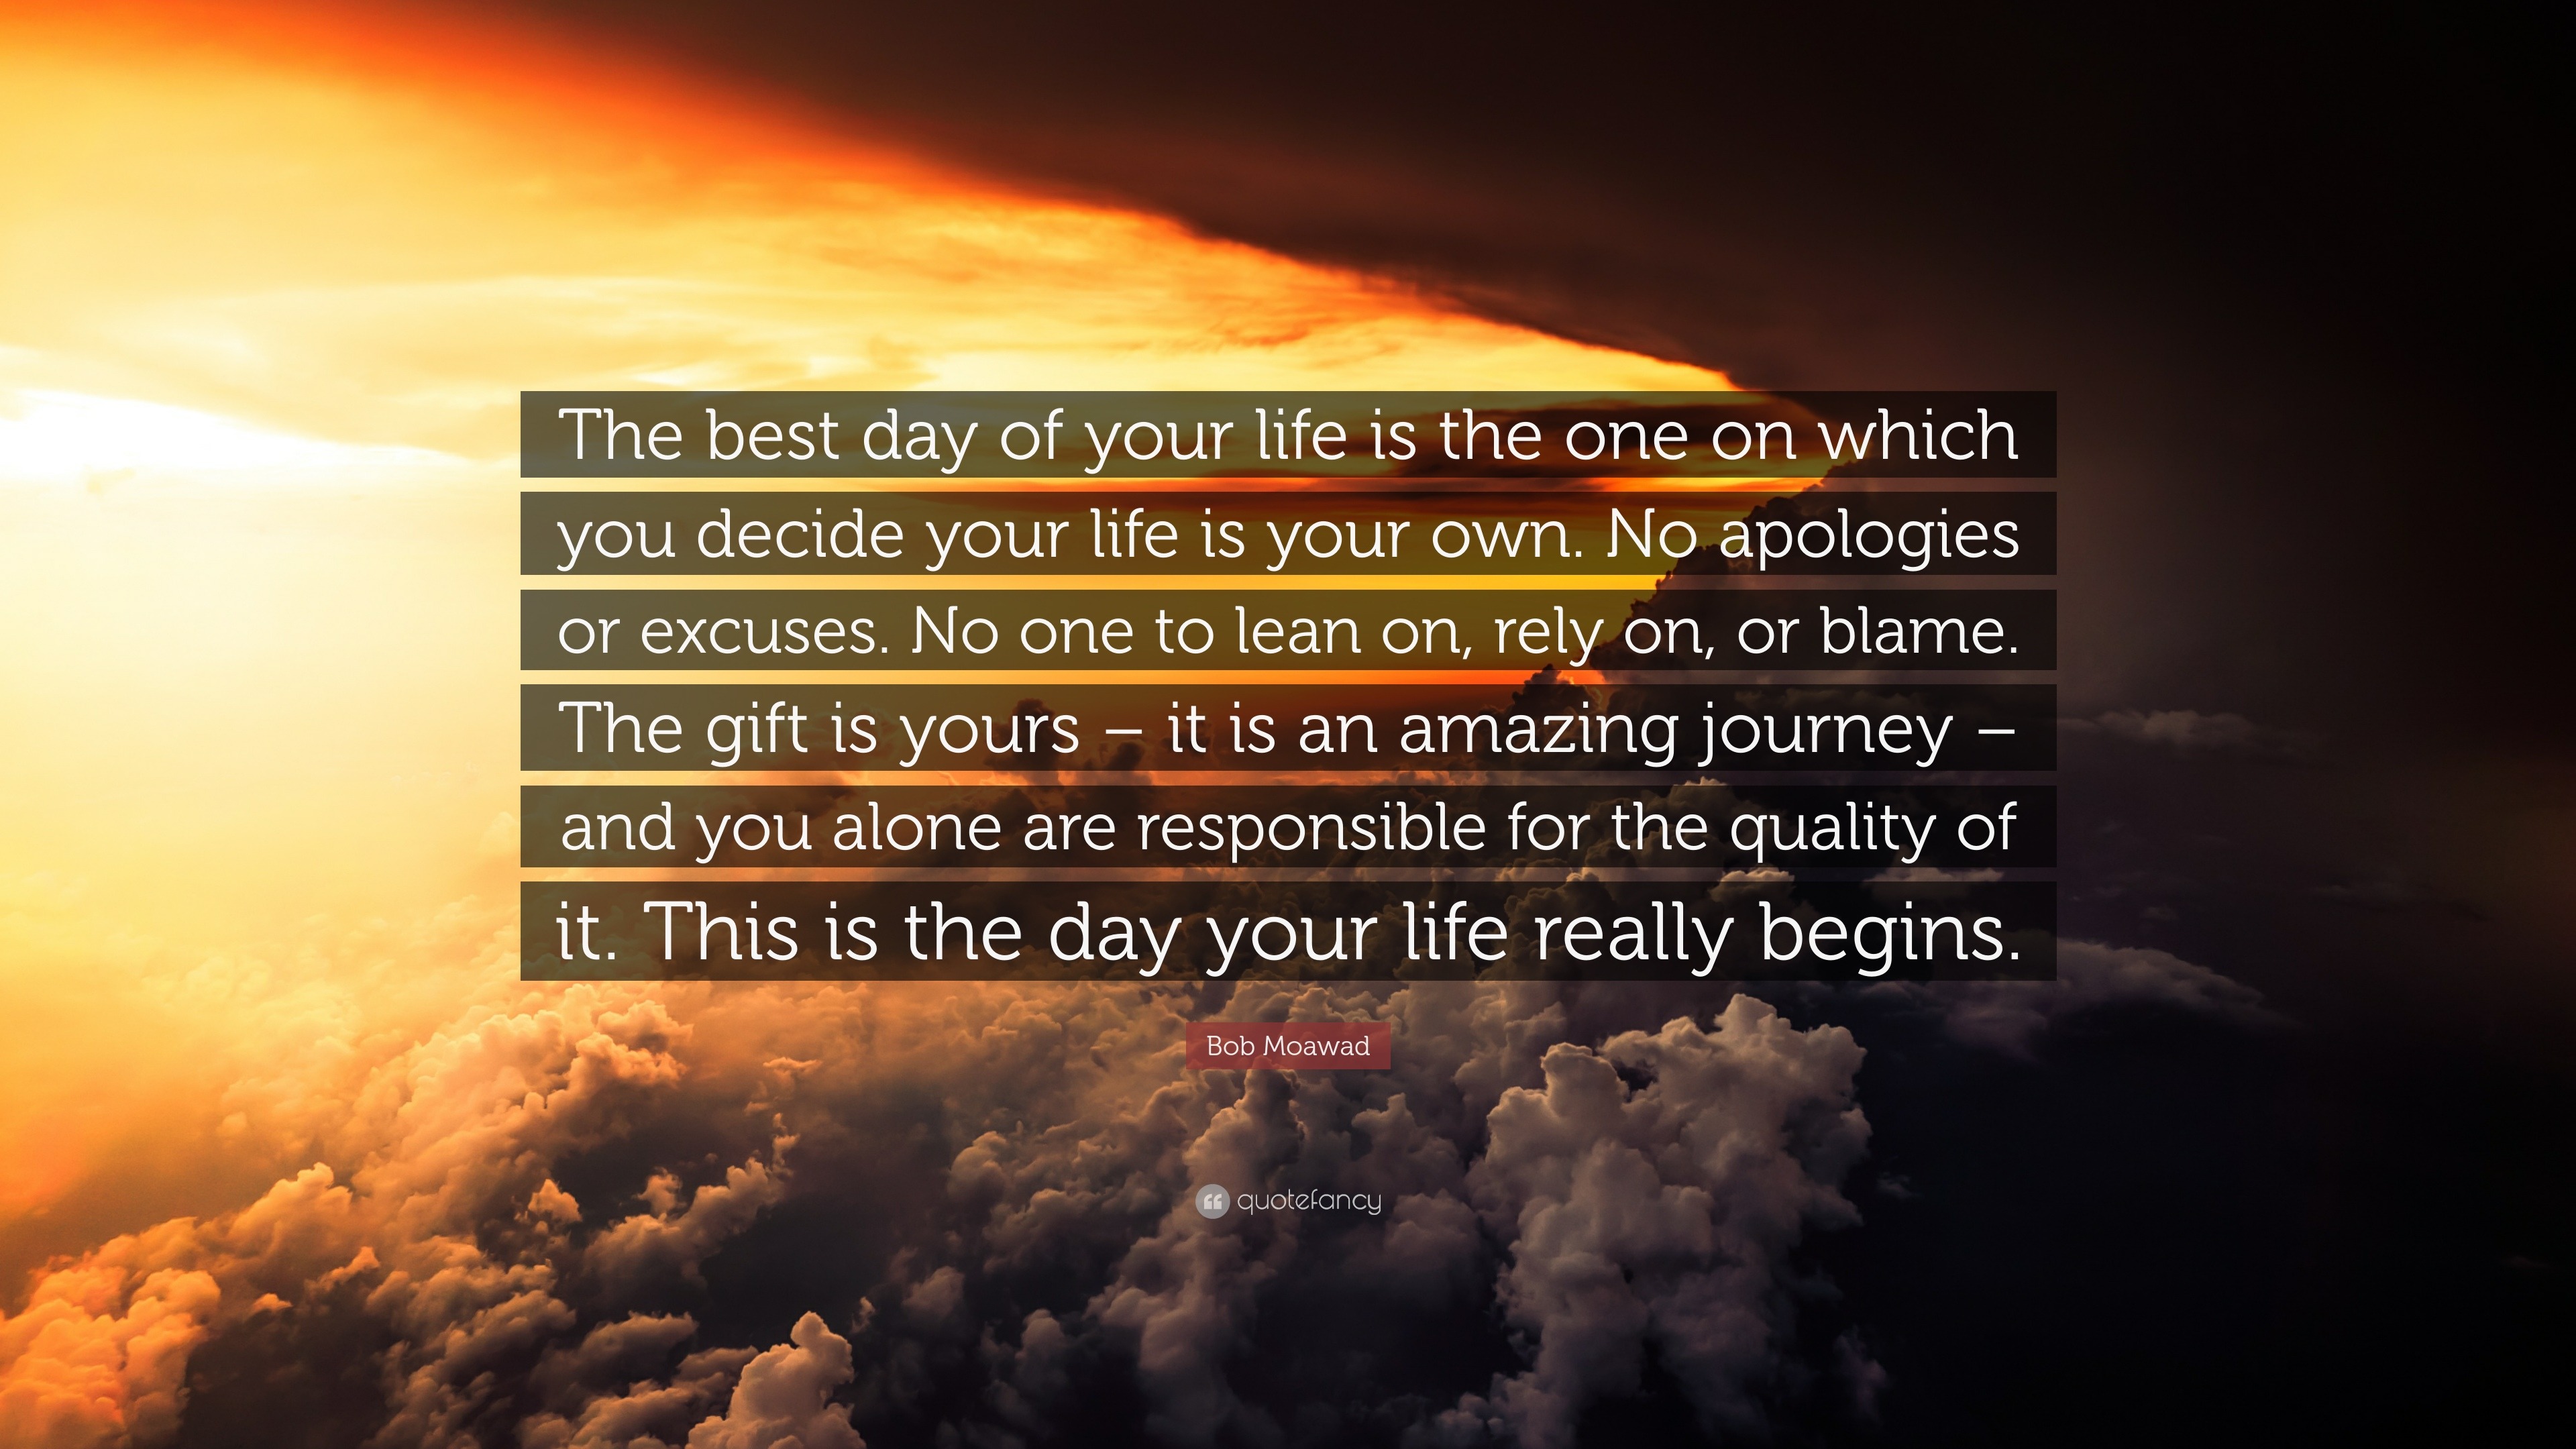 Bob Moawad Quote “The best day of your life is the one on which